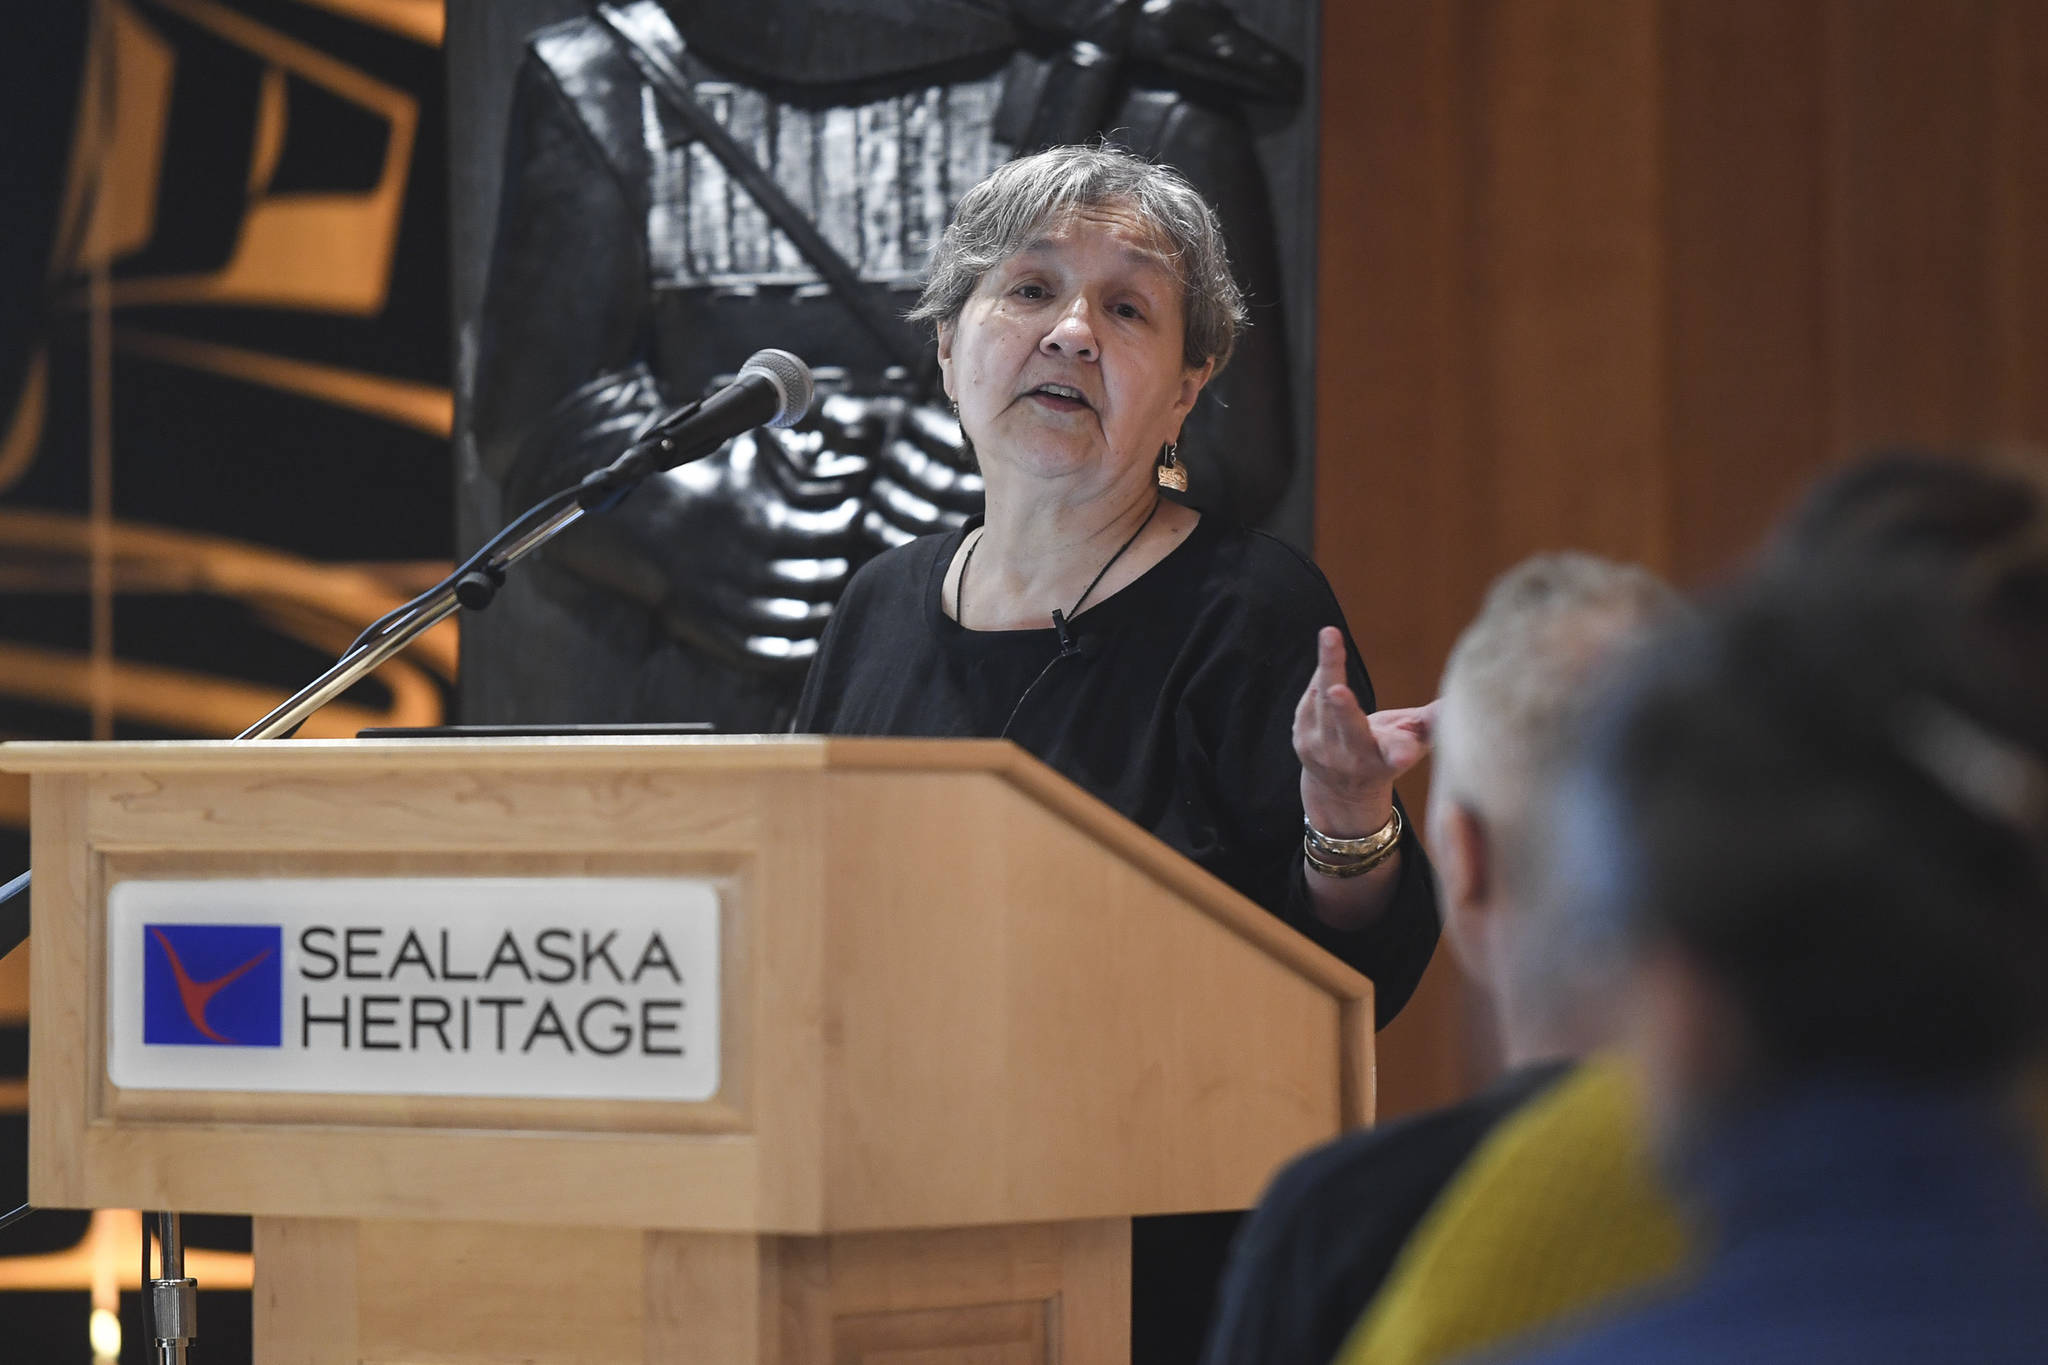 Ernestine Hayes, a Tlingit author and former Alaska State Writer Laureate from 2016-2018, gives a lecture on Juneau’s Indian Village at the Walter Soboleff Building on Monday, Nov. 18, 2019. The lecture is sponsored by the Sealaska Heritage Institute. (Michael Penn | Juneau Empire)